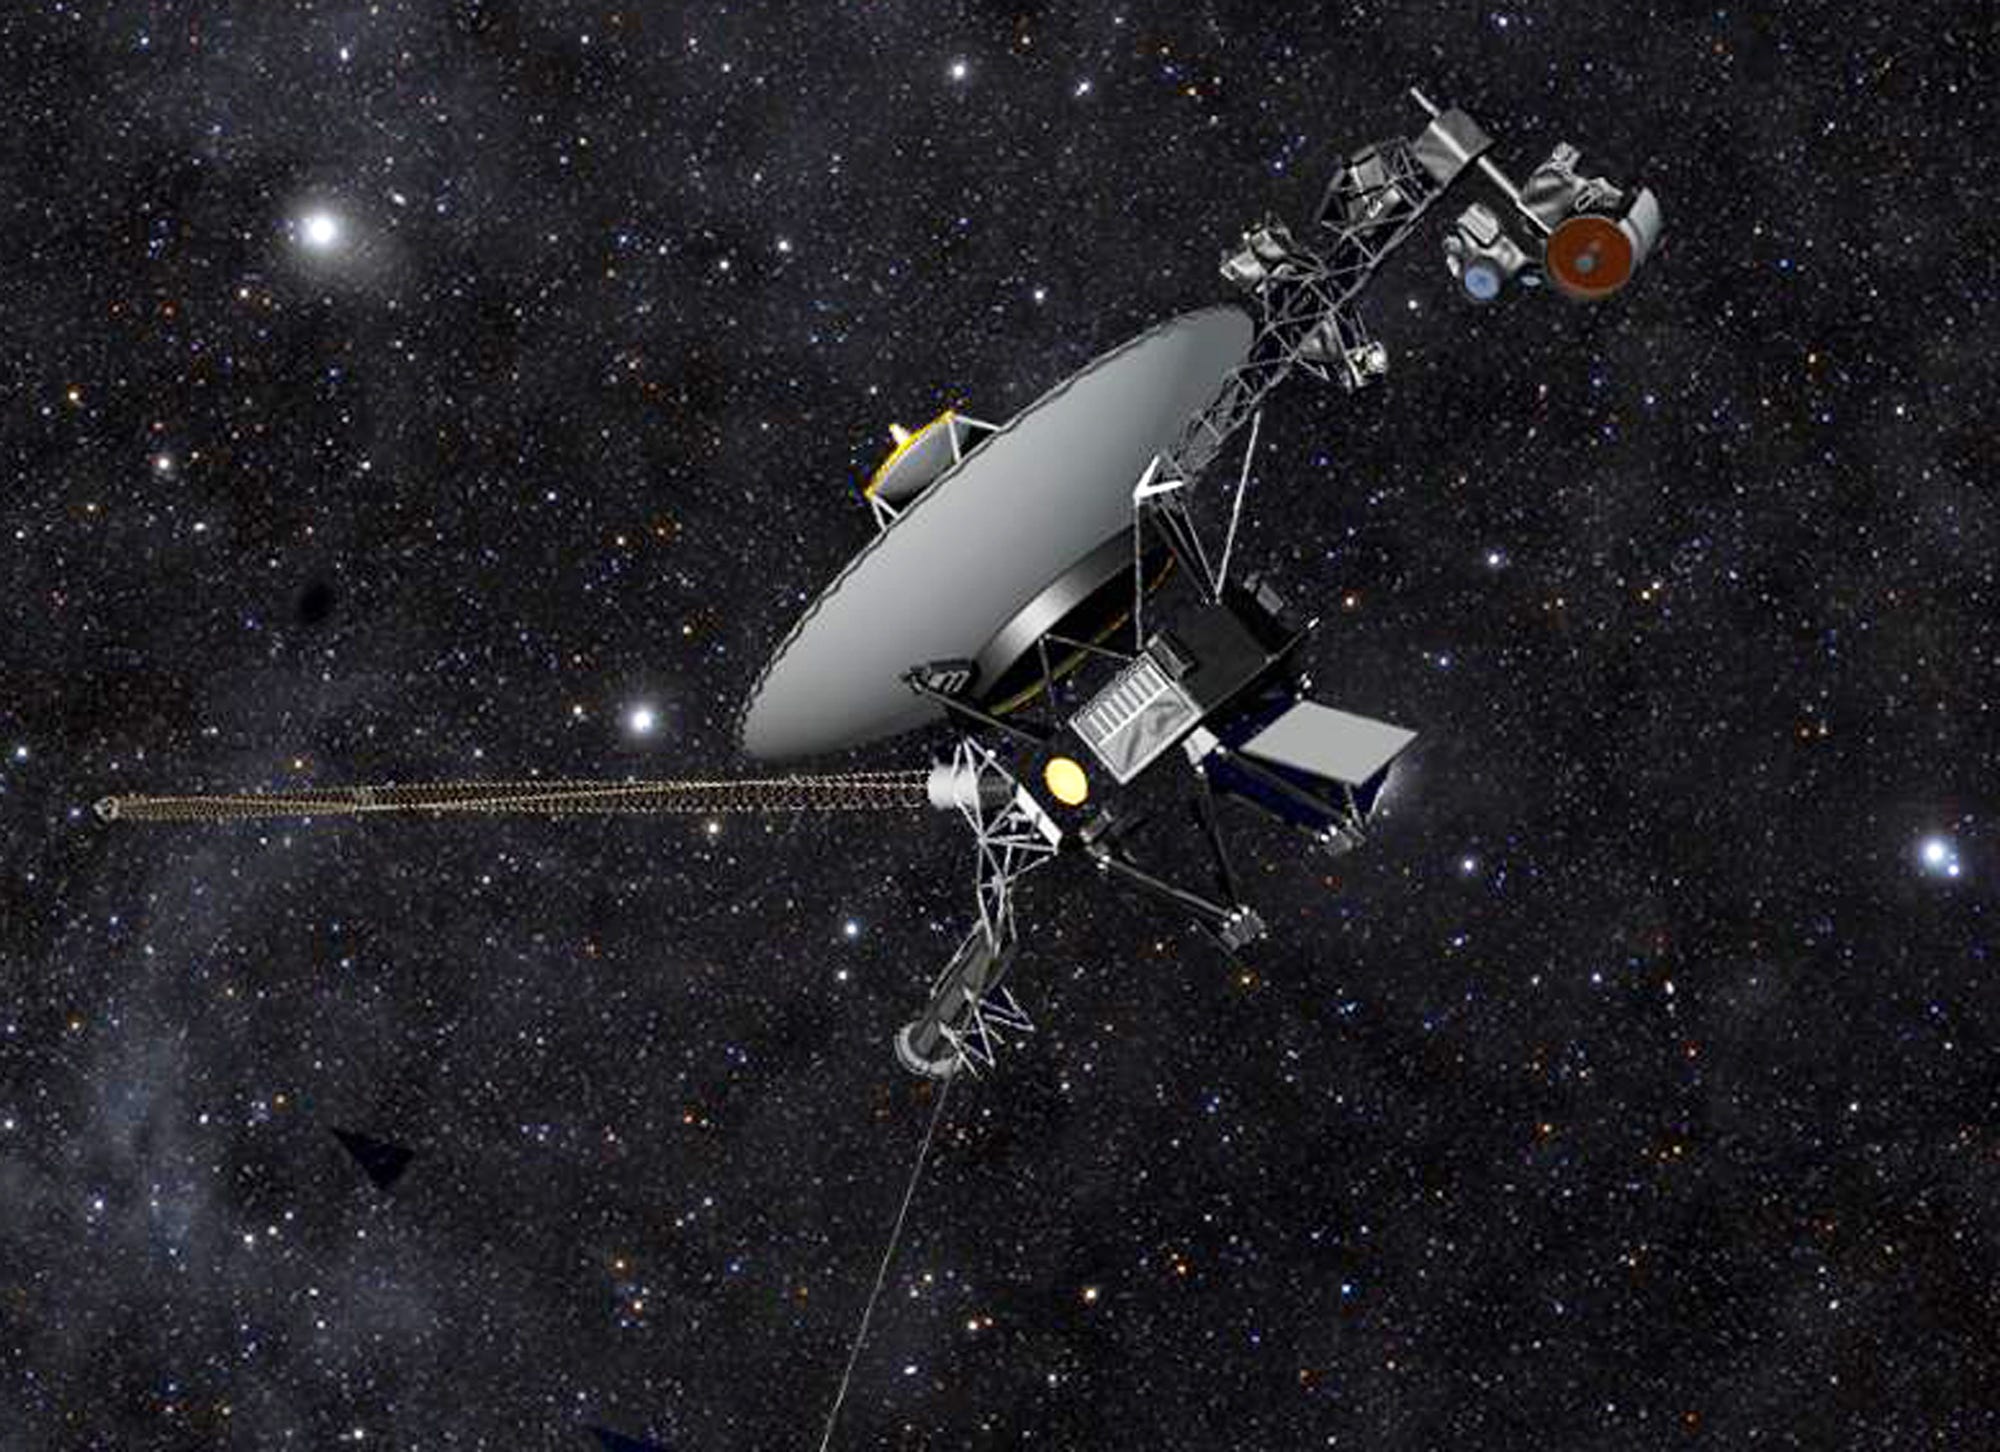 Artist rendering shows NASA's Voyager 1 spacecraft barreling through space. NASA announced Sept. 12 that Voyager 1 has become the first spacecraft to enter interstellar space, or the space between stars, more than three decades after launching from Earth.